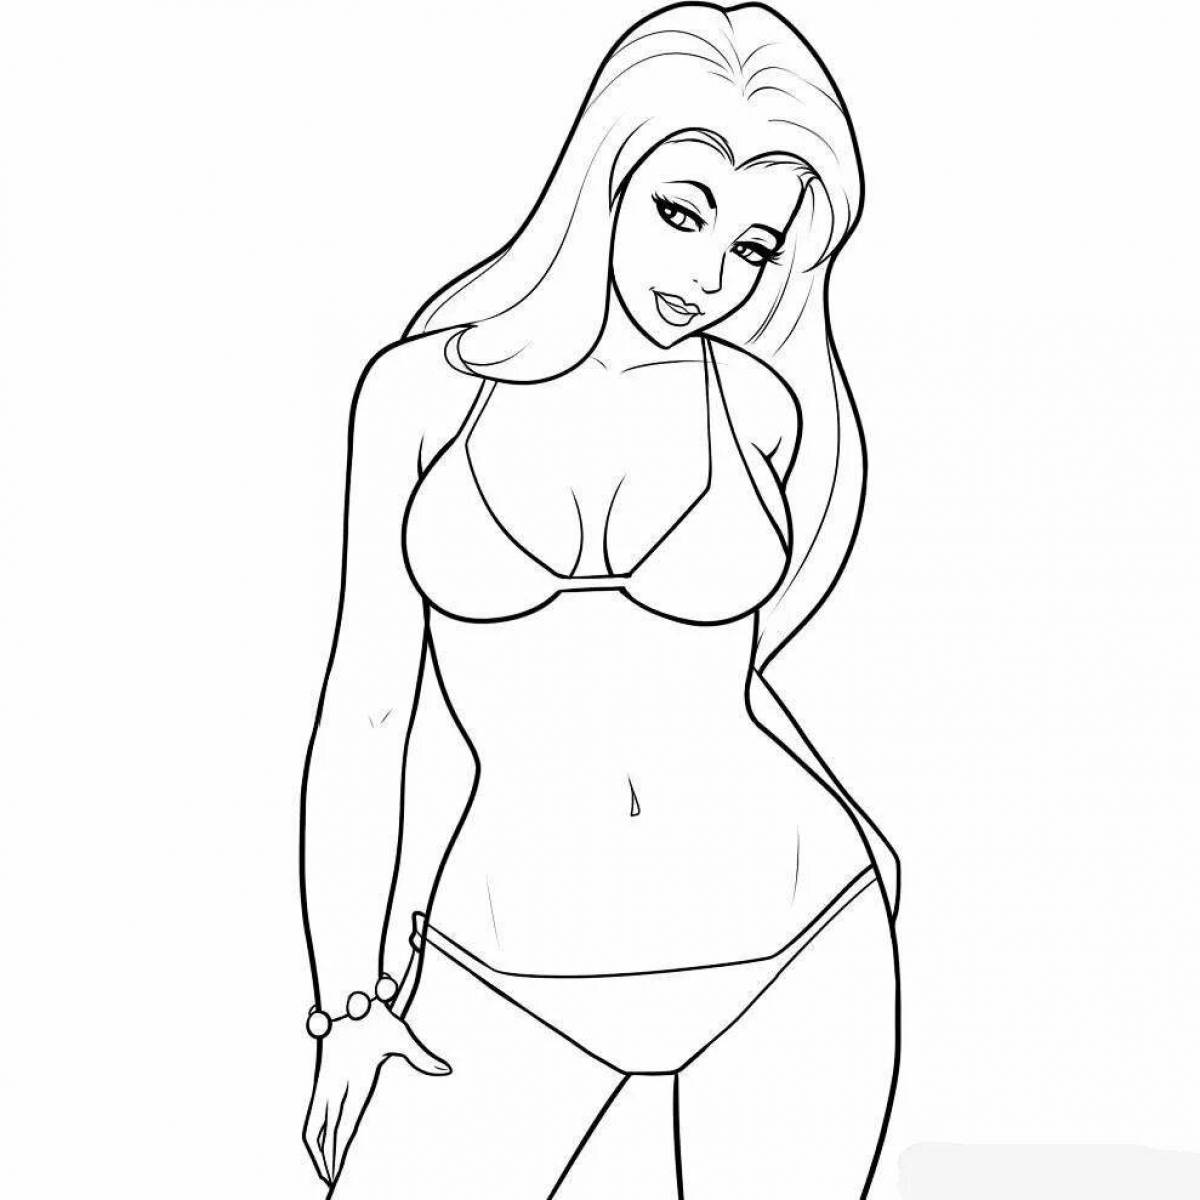 Colorful boobs coloring pages